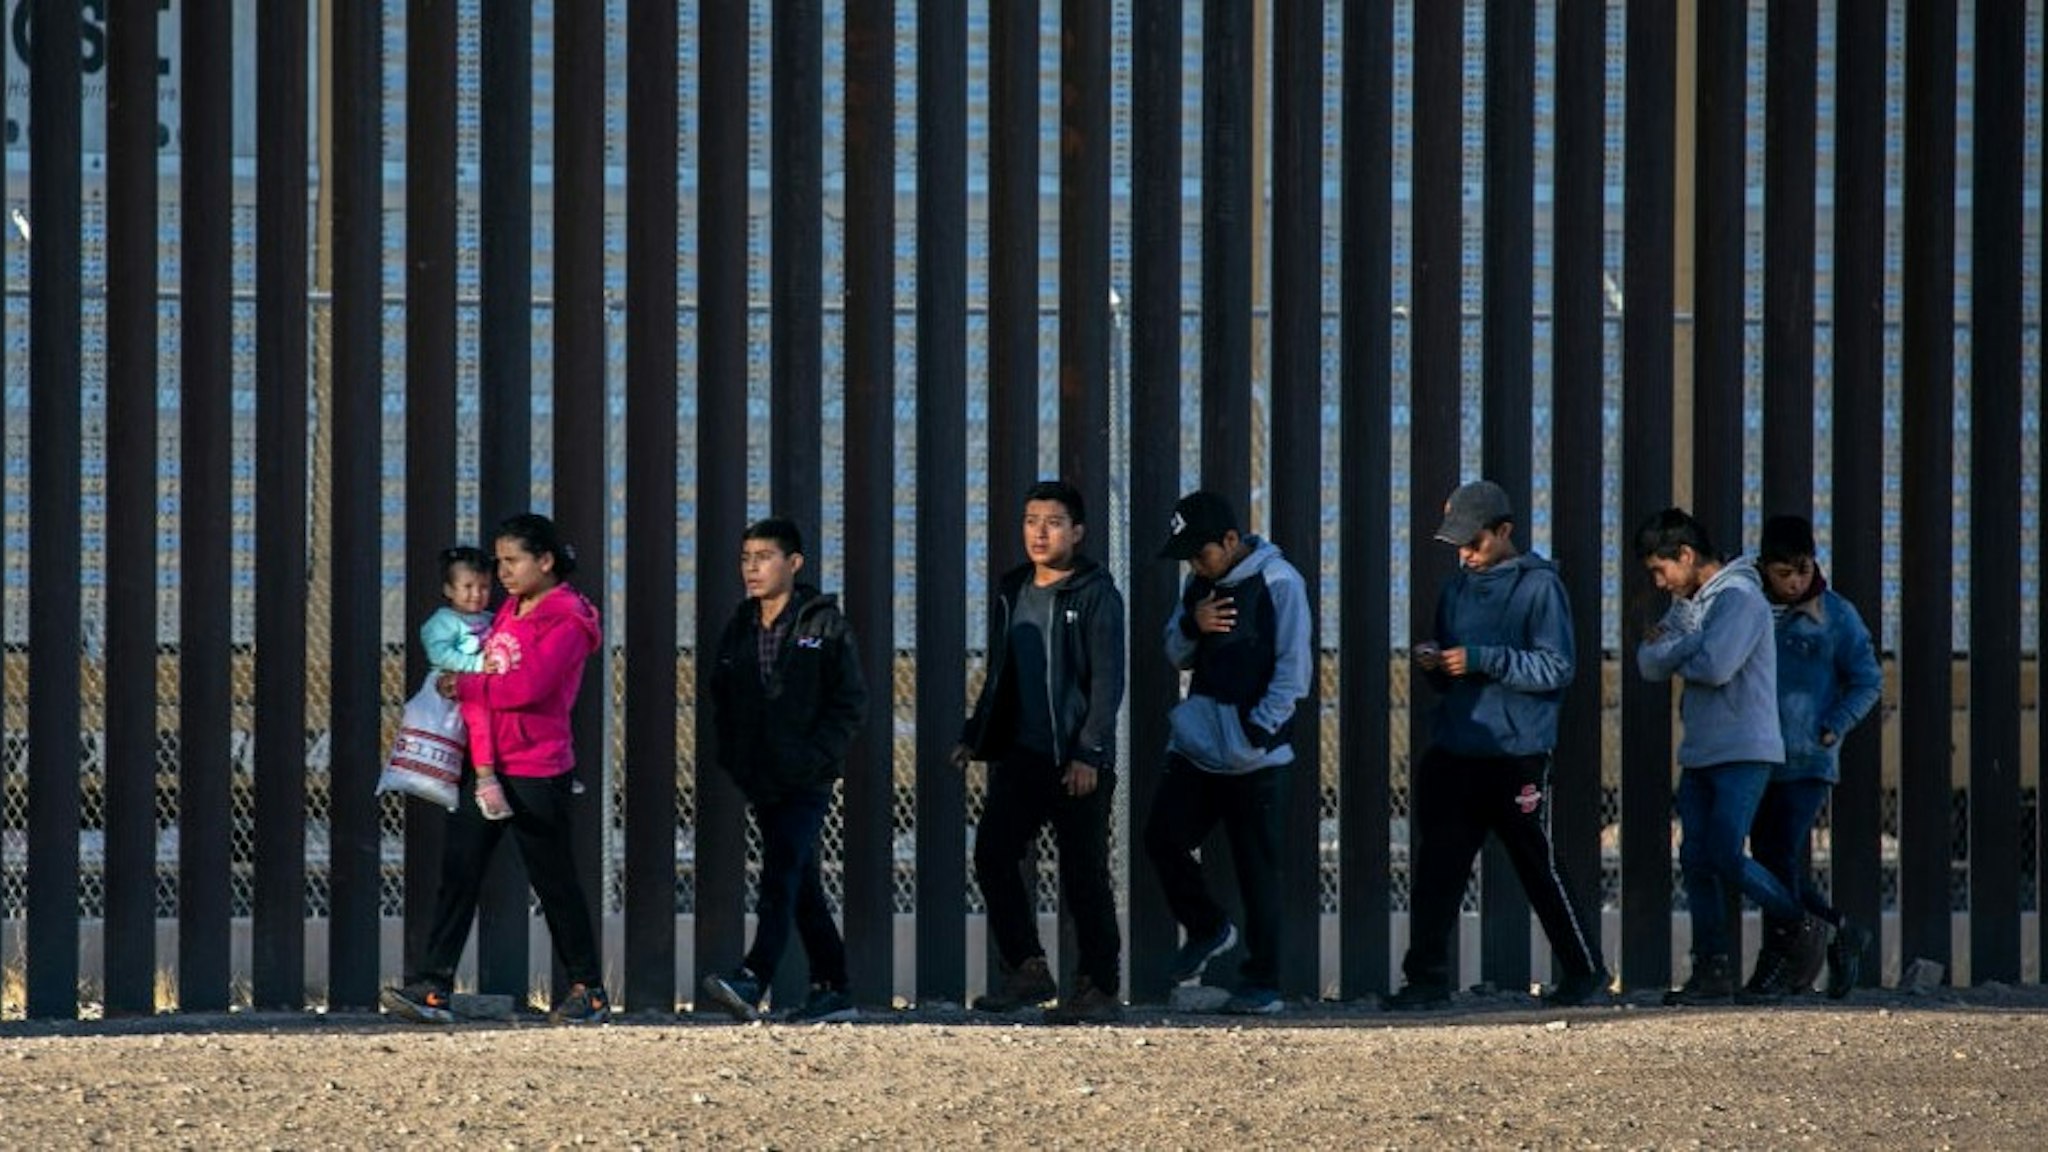 CIUDAD JUAREZ, MEXICO - MARCH 17: Undocumented immigrants walk along the U.S.-Mexico border wall after they ran across the shallow Rio Grande into El Paso on March 17, 2021 in Ciudad Juarez, Mexico. U.S. immigration officials are dealing with an immigrant surge along the southwest border with Mexico. (Photo by